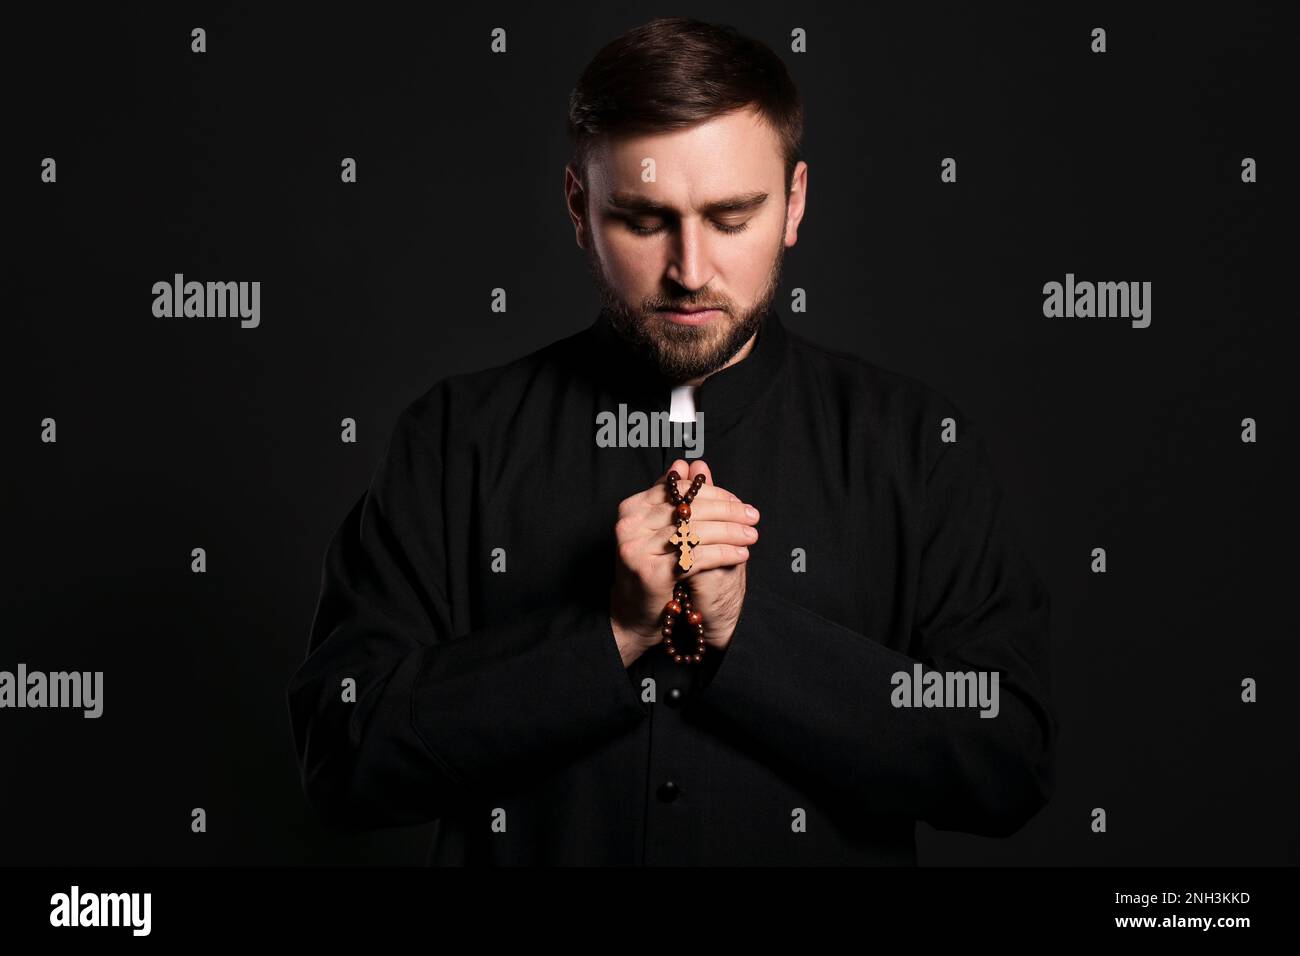 Priest with rosary beads praying on black background Stock Photo